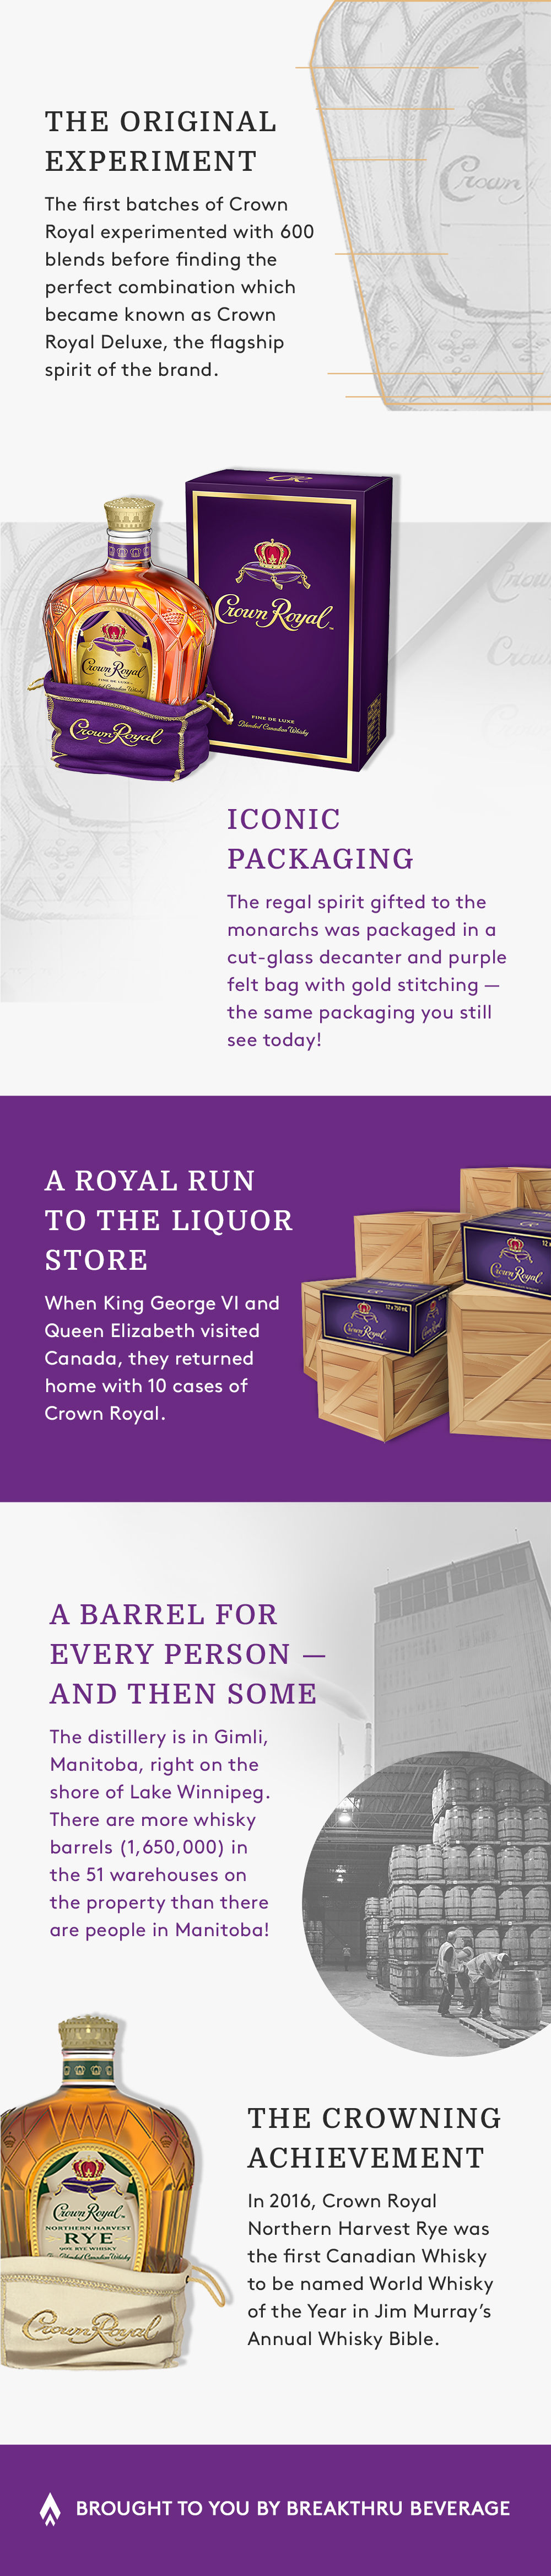 SYTYK Crown Royal Infographic - Canadian Version